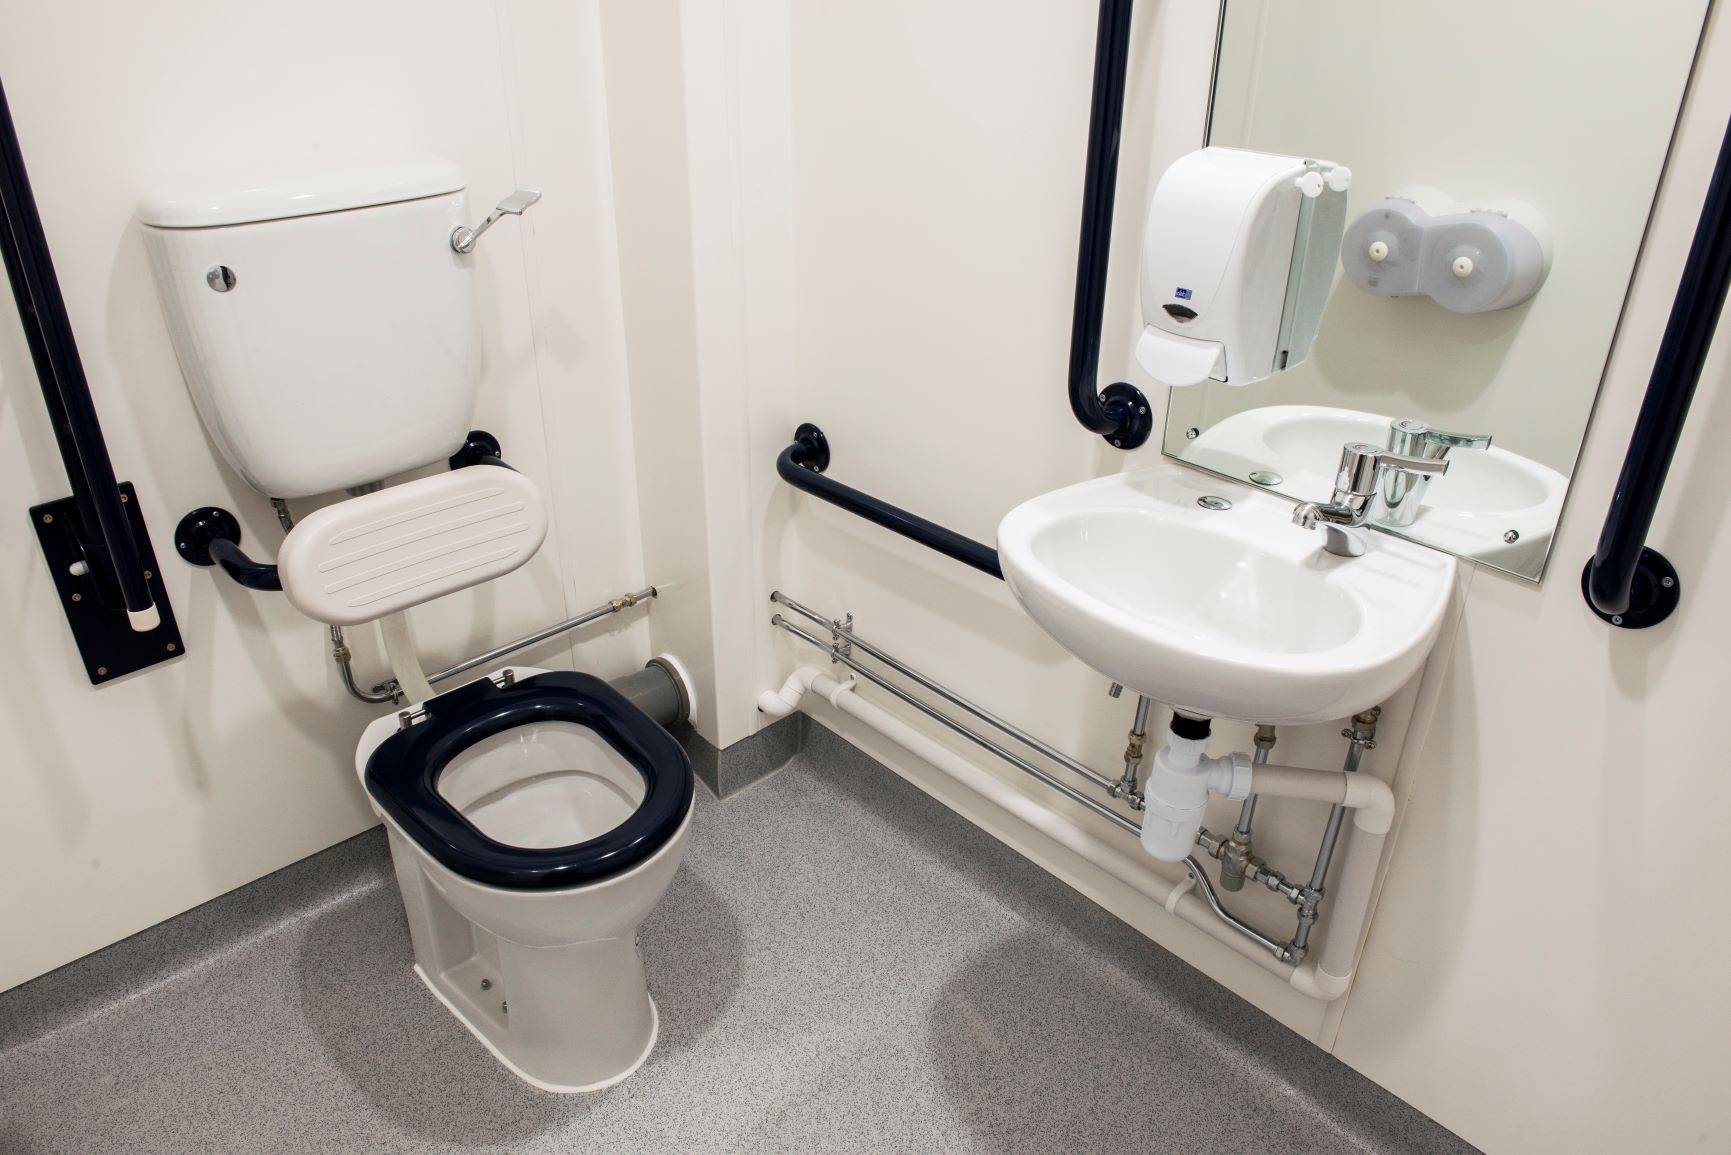 What are the dimensions of a disabled toilet room?